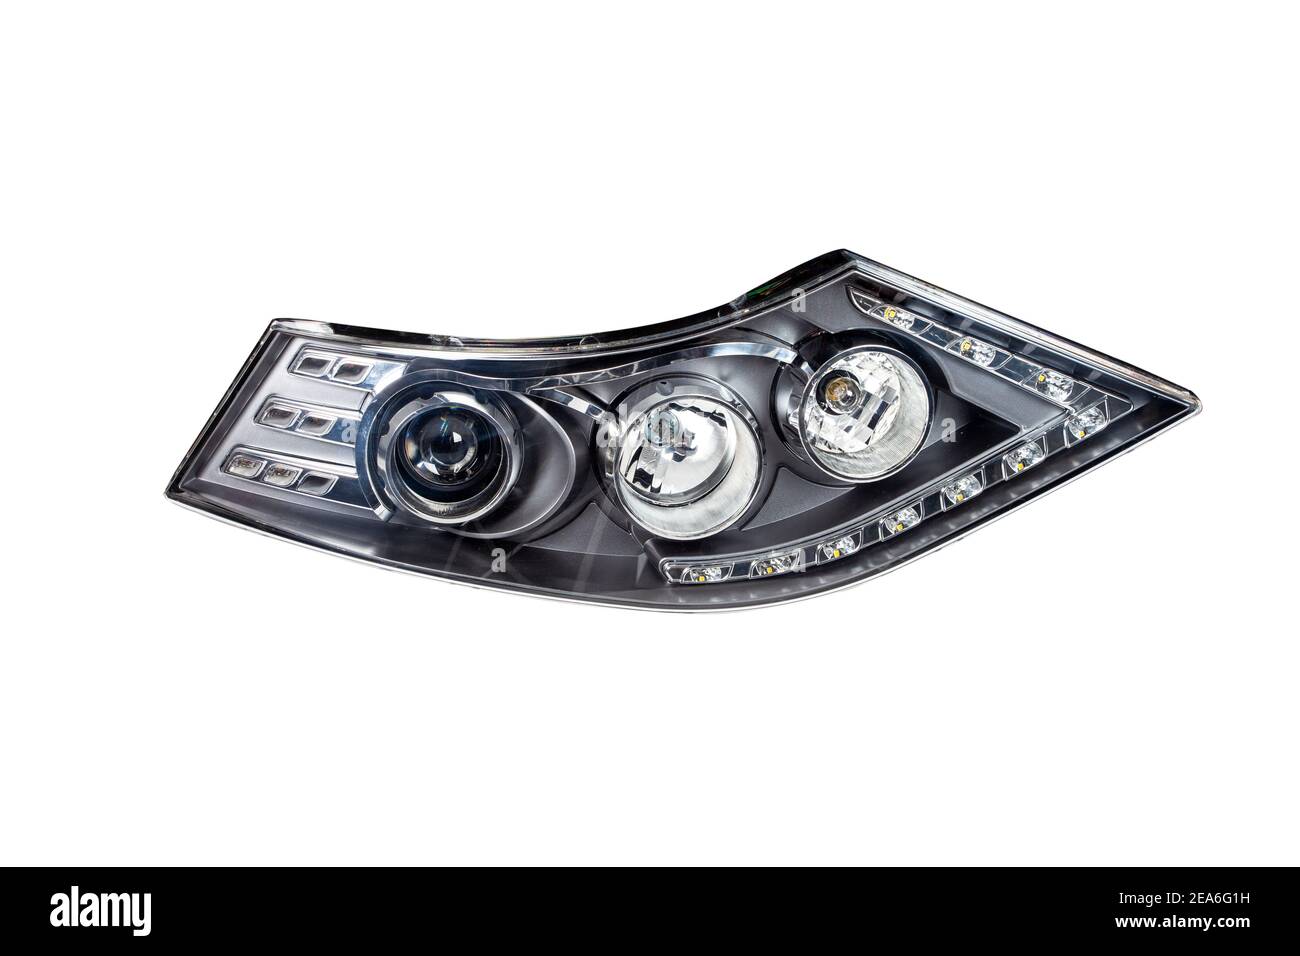 Car headlight with led lamps, white isolated background Stock Photo